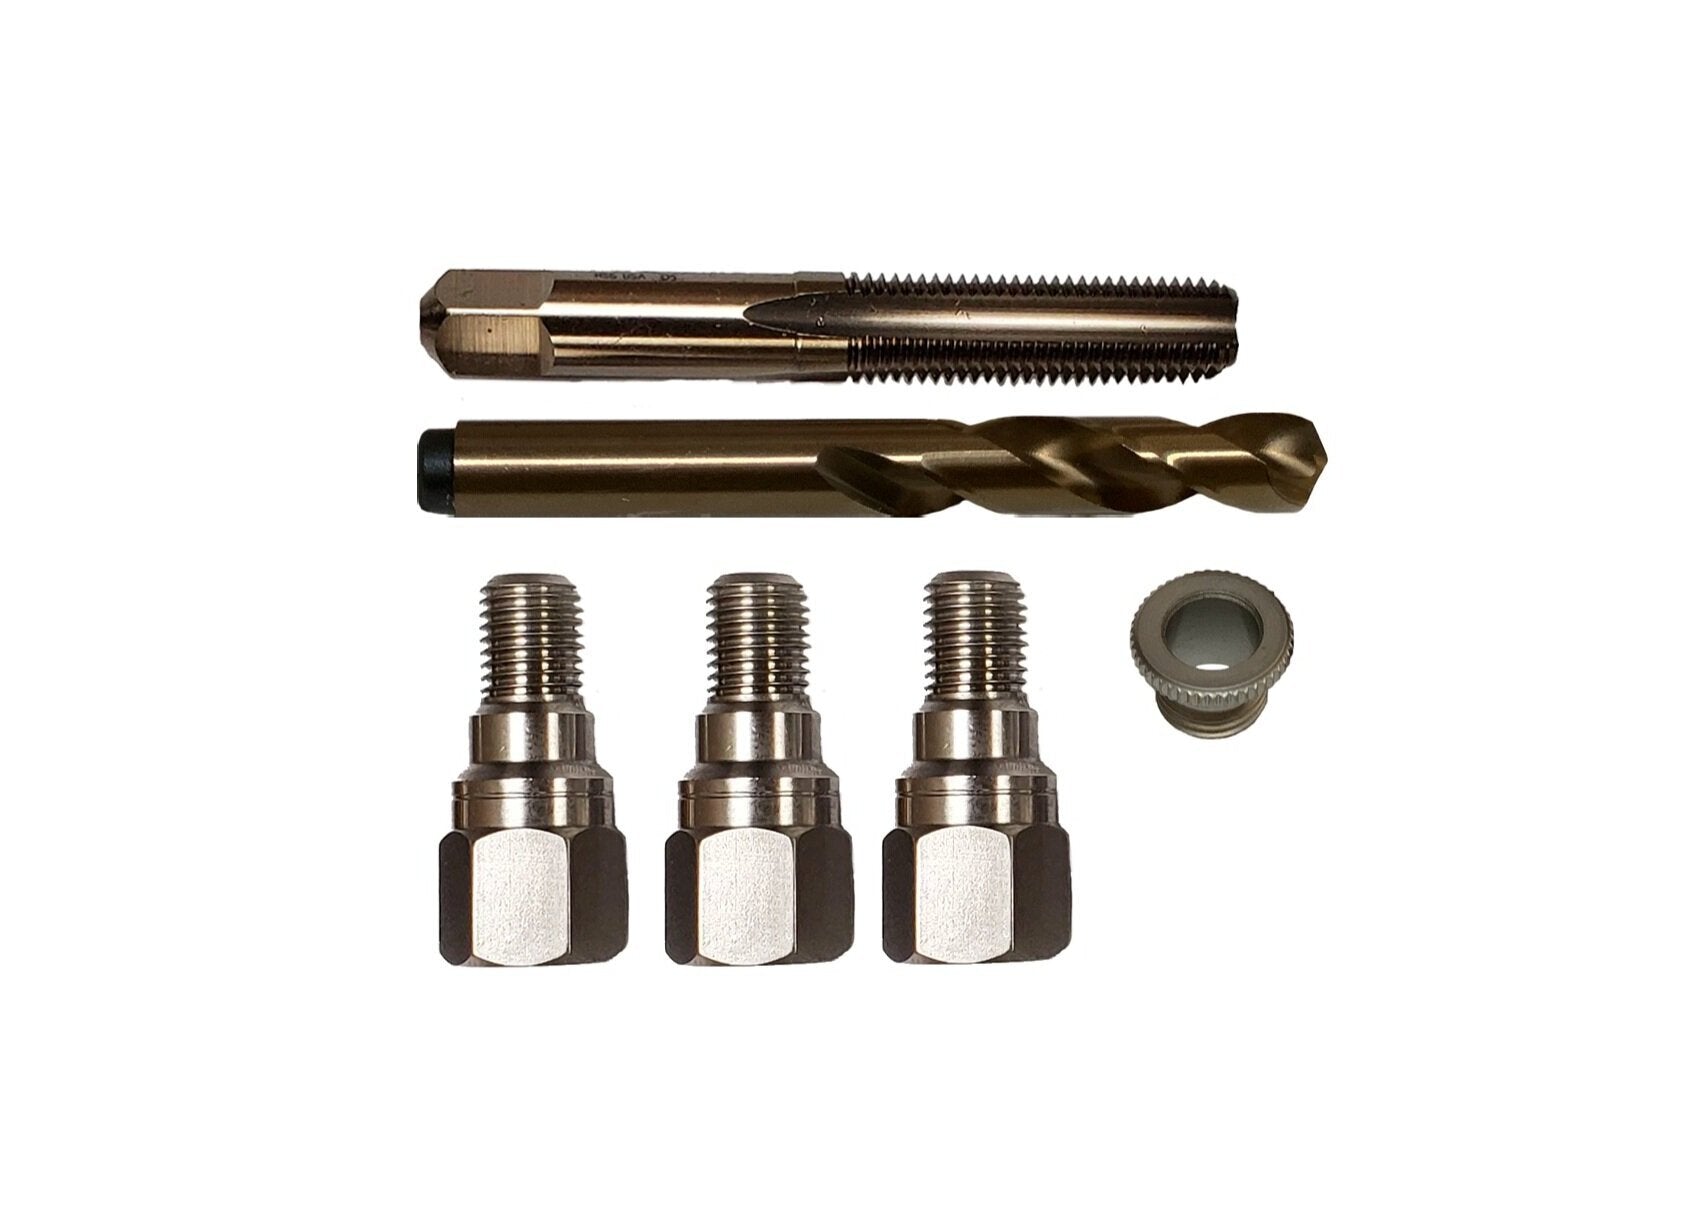 BULLIT Enhancement Kits for 10mm x 150 Adapts to Other In-Line Broken Bolt Repair Sizes